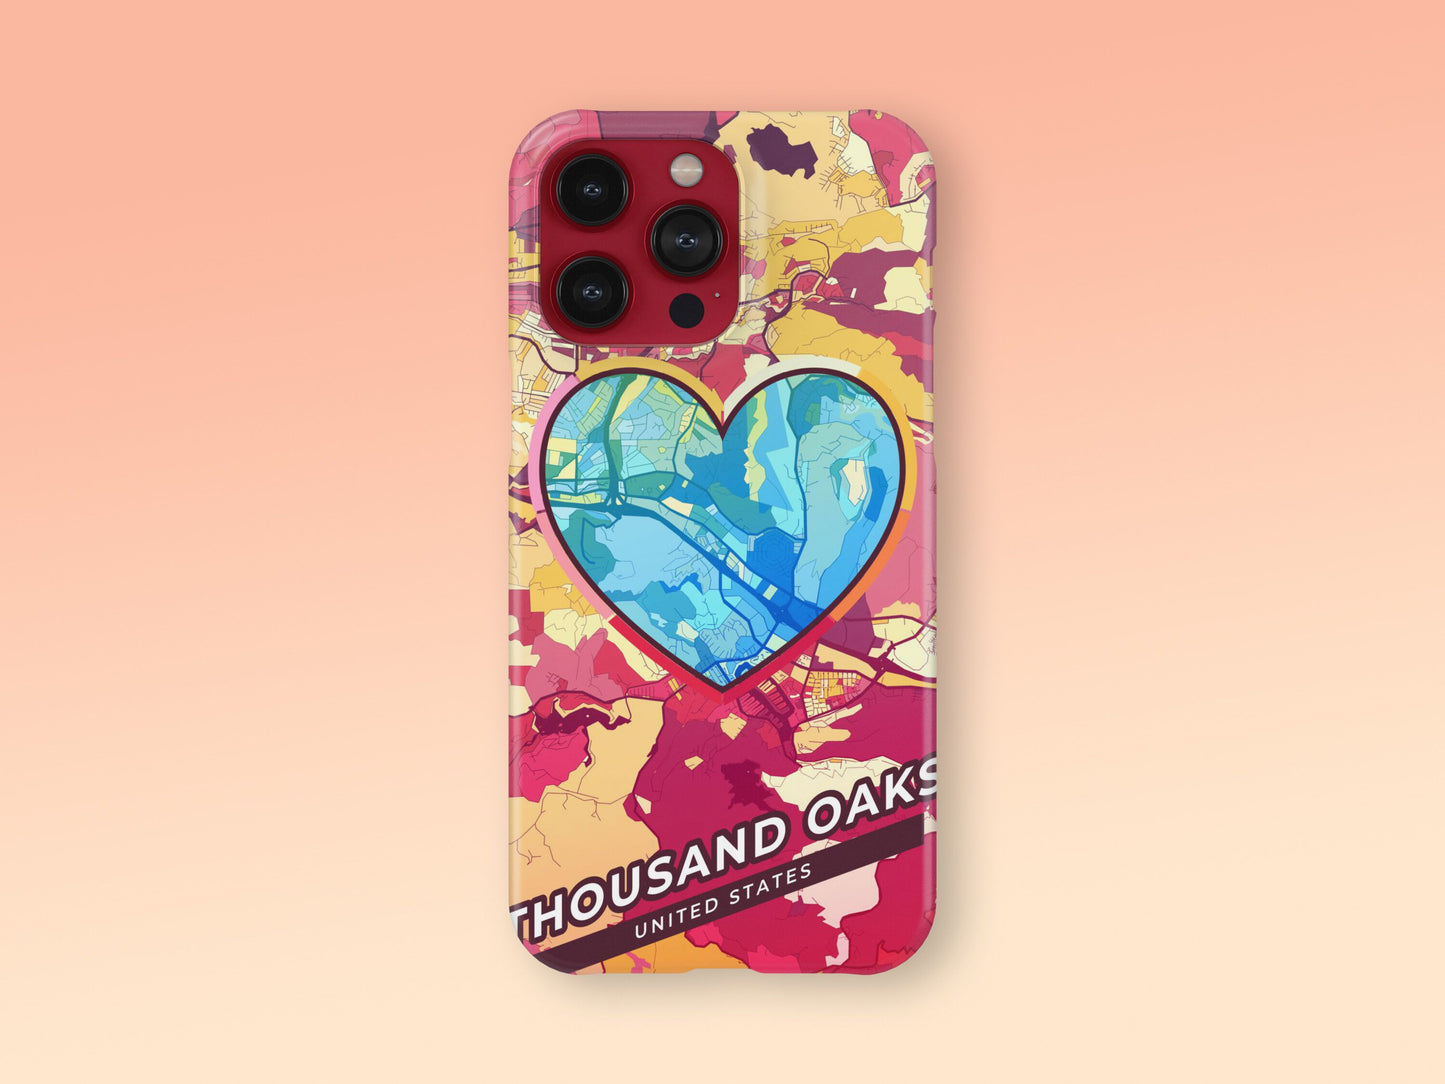 Thousand Oaks California slim phone case with colorful icon 2